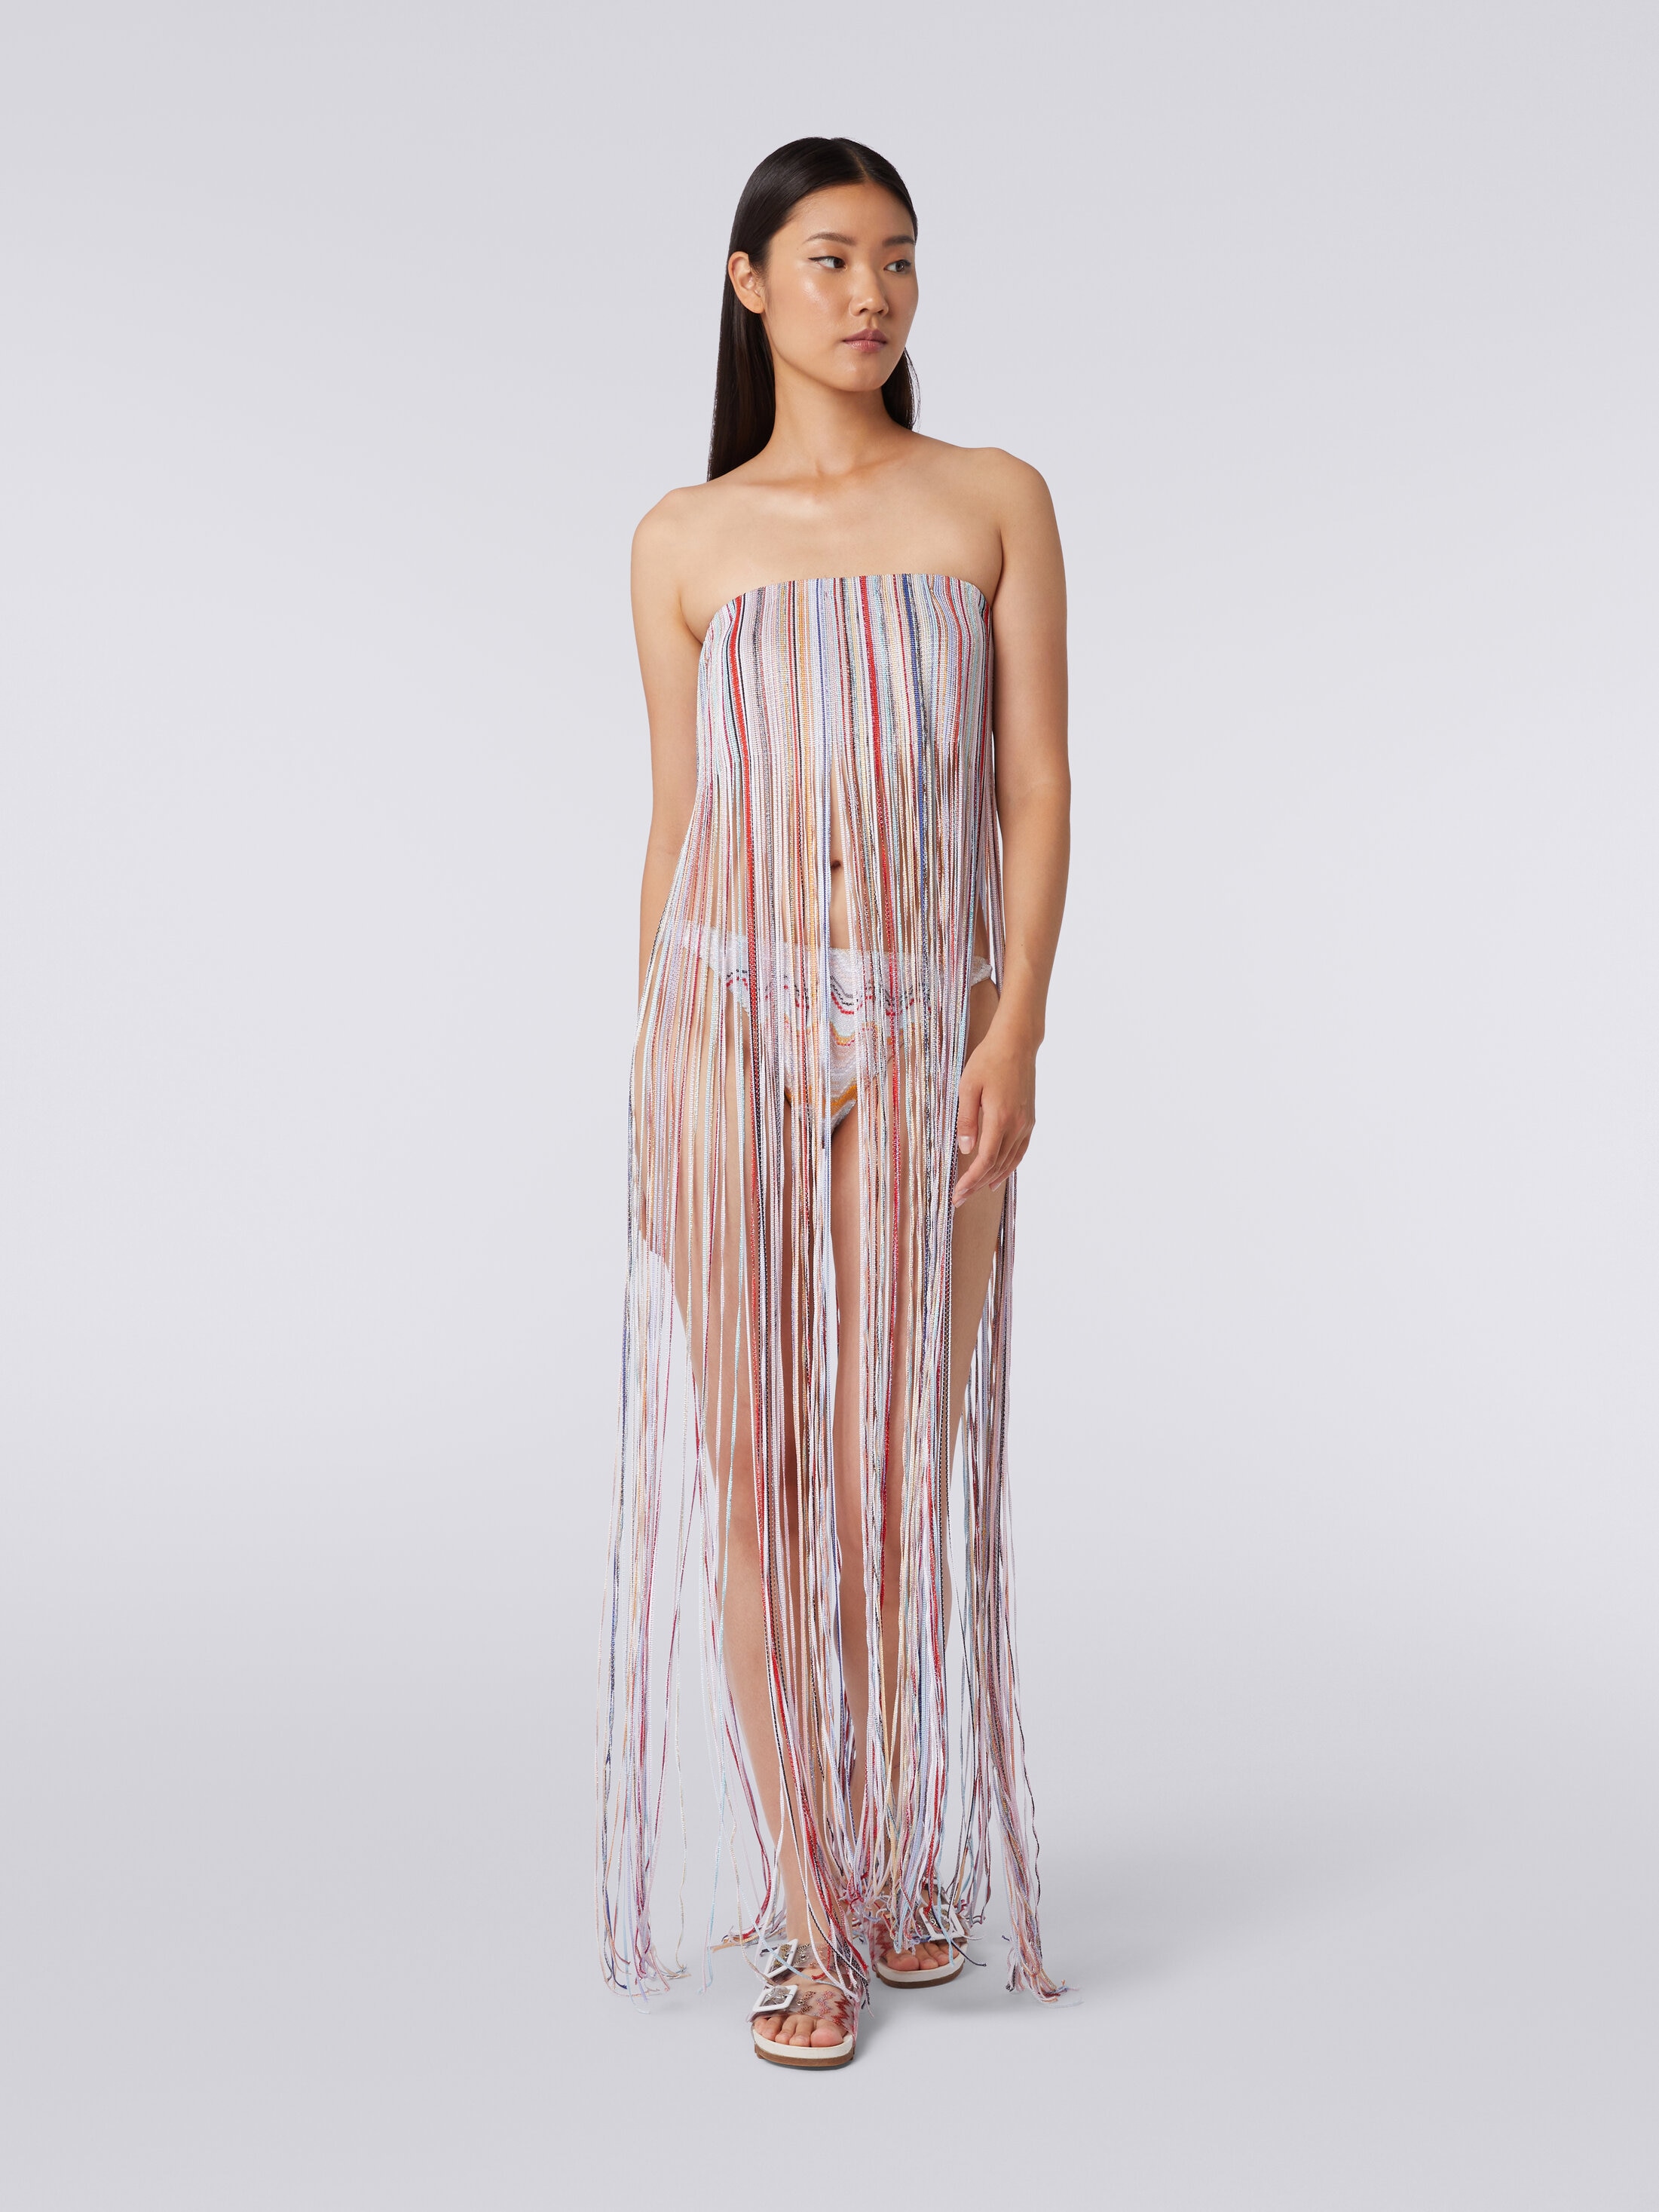 Fringed bustier cover up dress with lurex